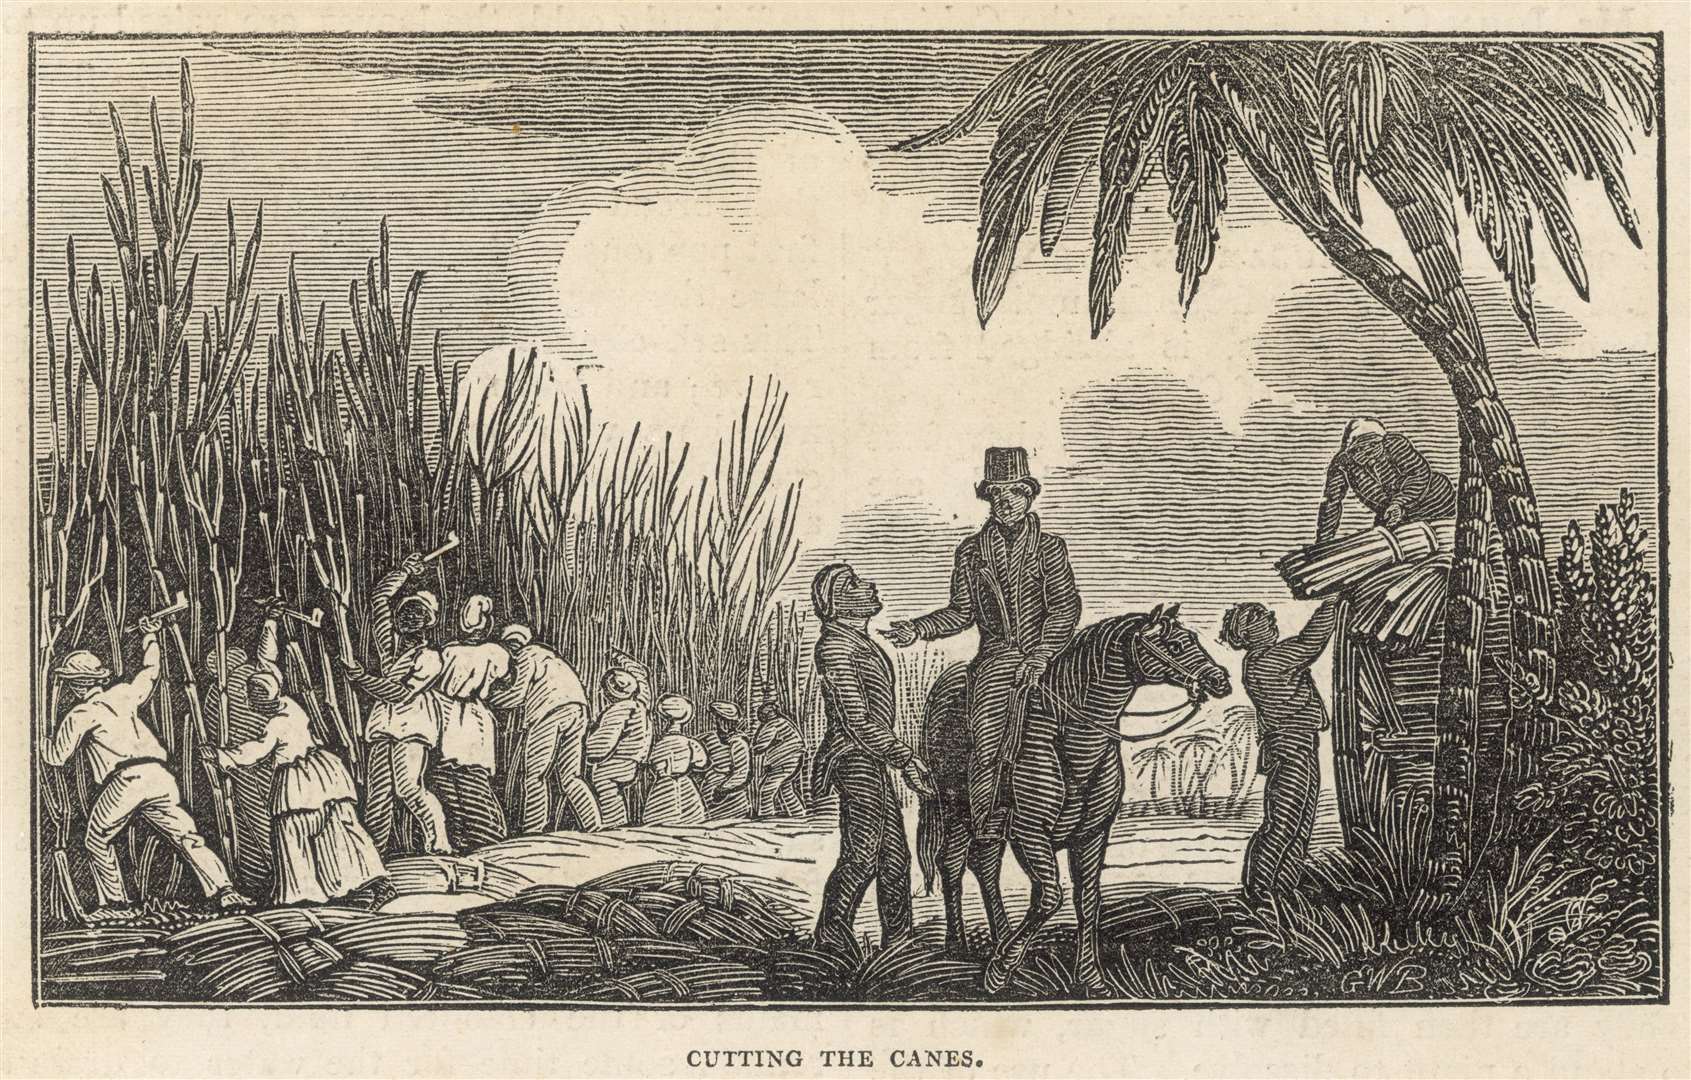 Slavery in the West Indies is depicted in this image from 1833.